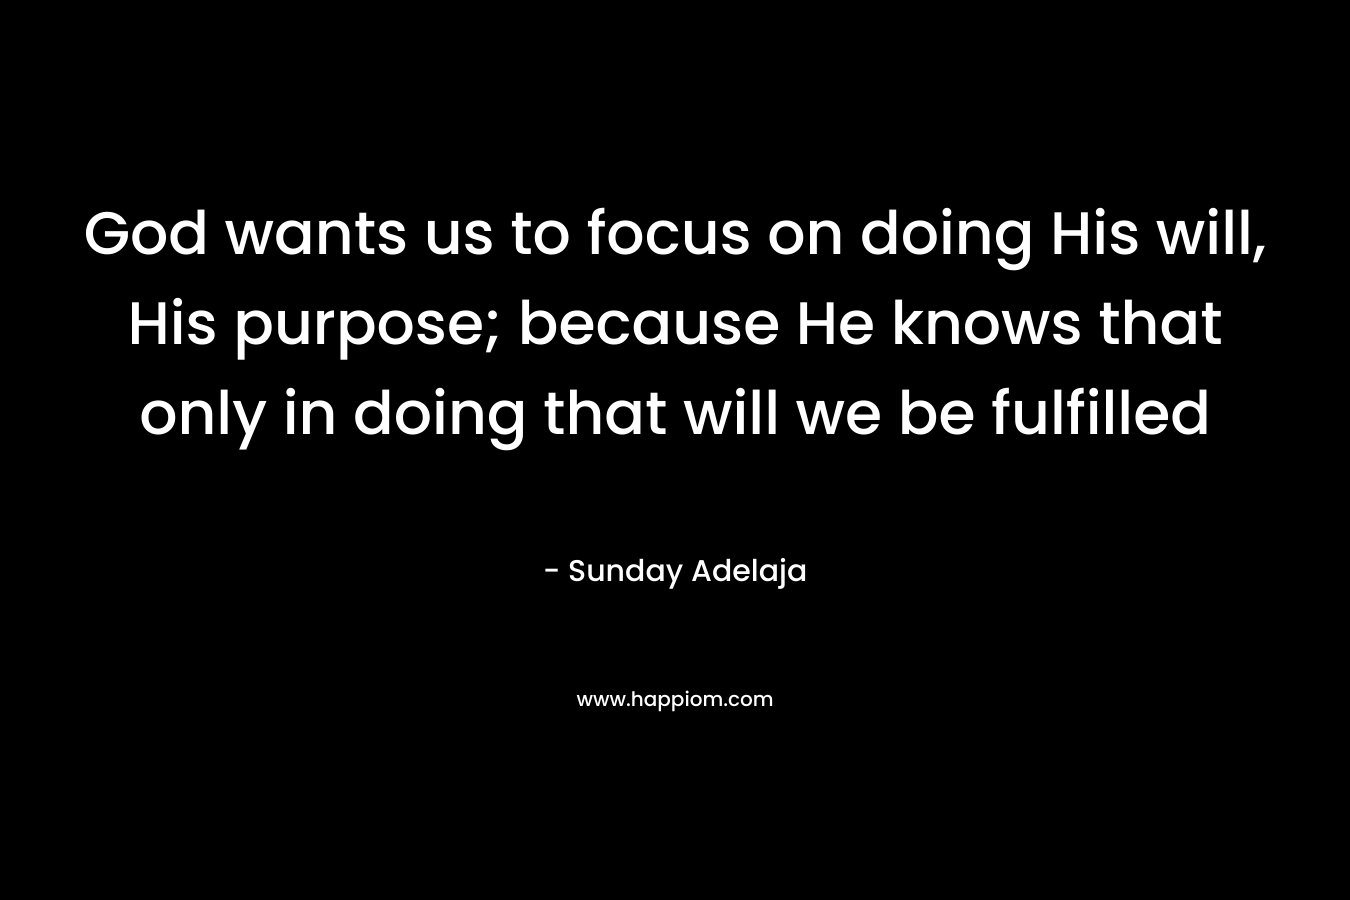 God wants us to focus on doing His will, His purpose; because He knows that only in doing that will we be fulfilled